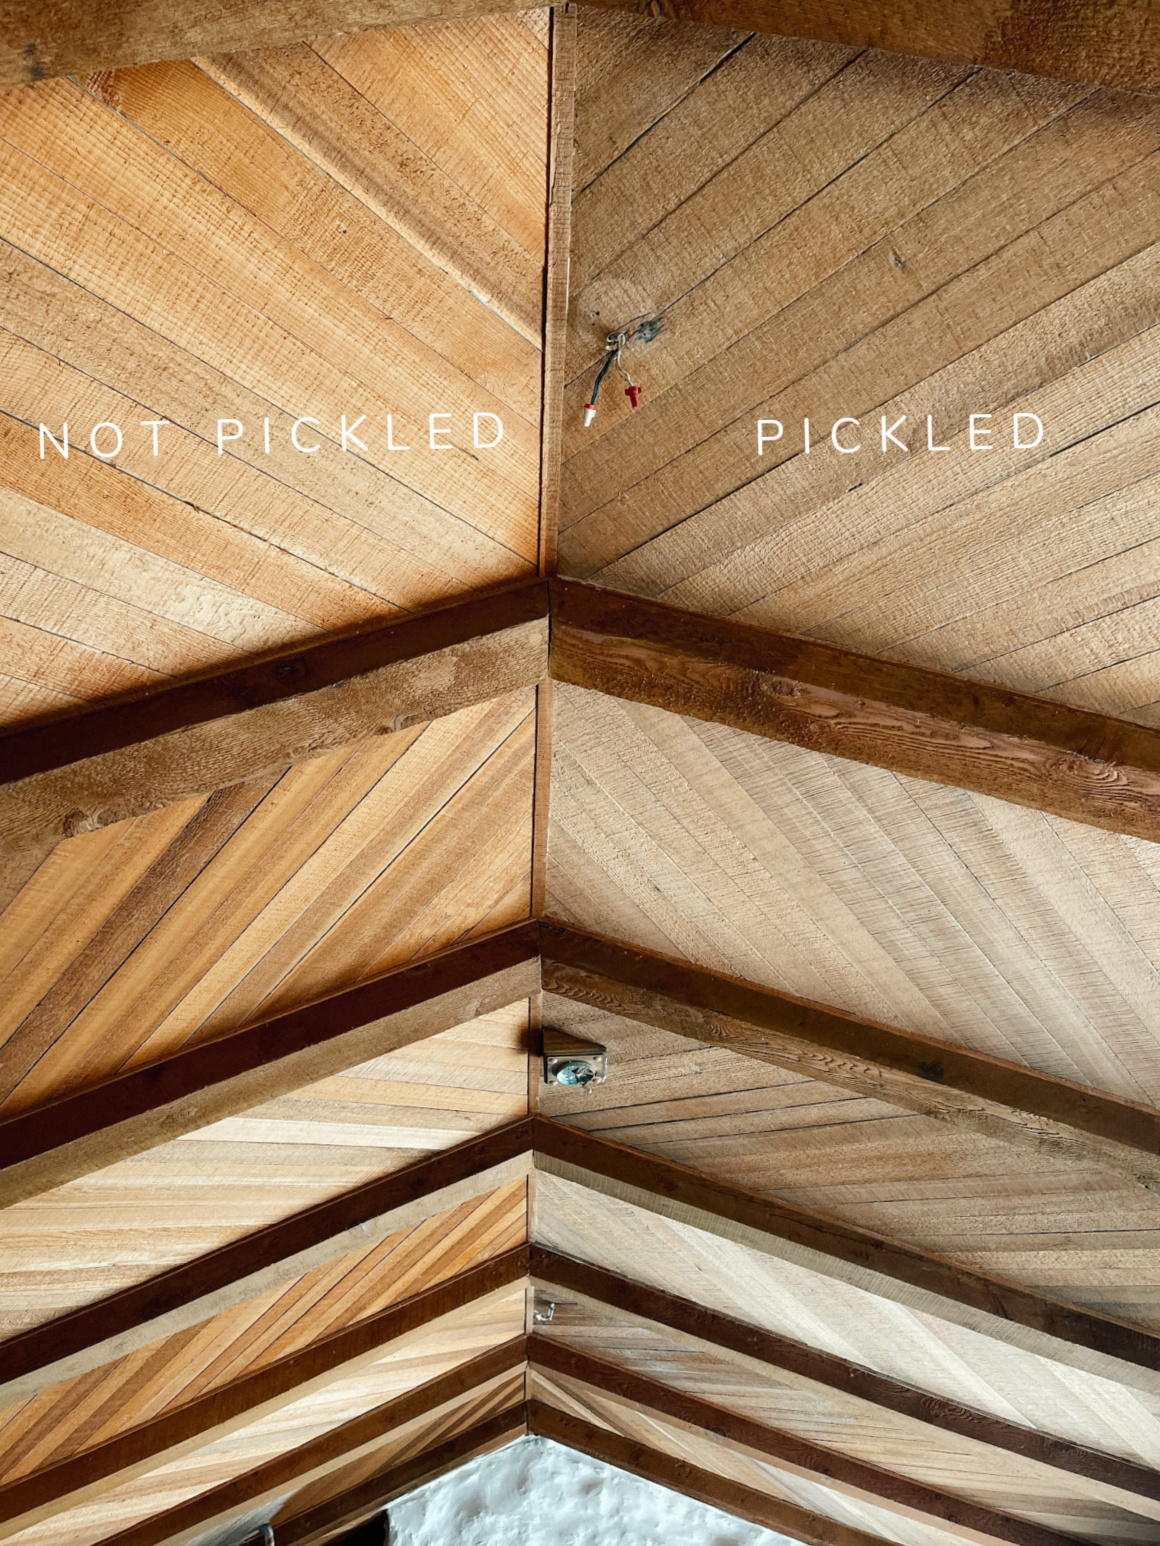 Pickled Wood Ceilings- How we took out the Orange Tone